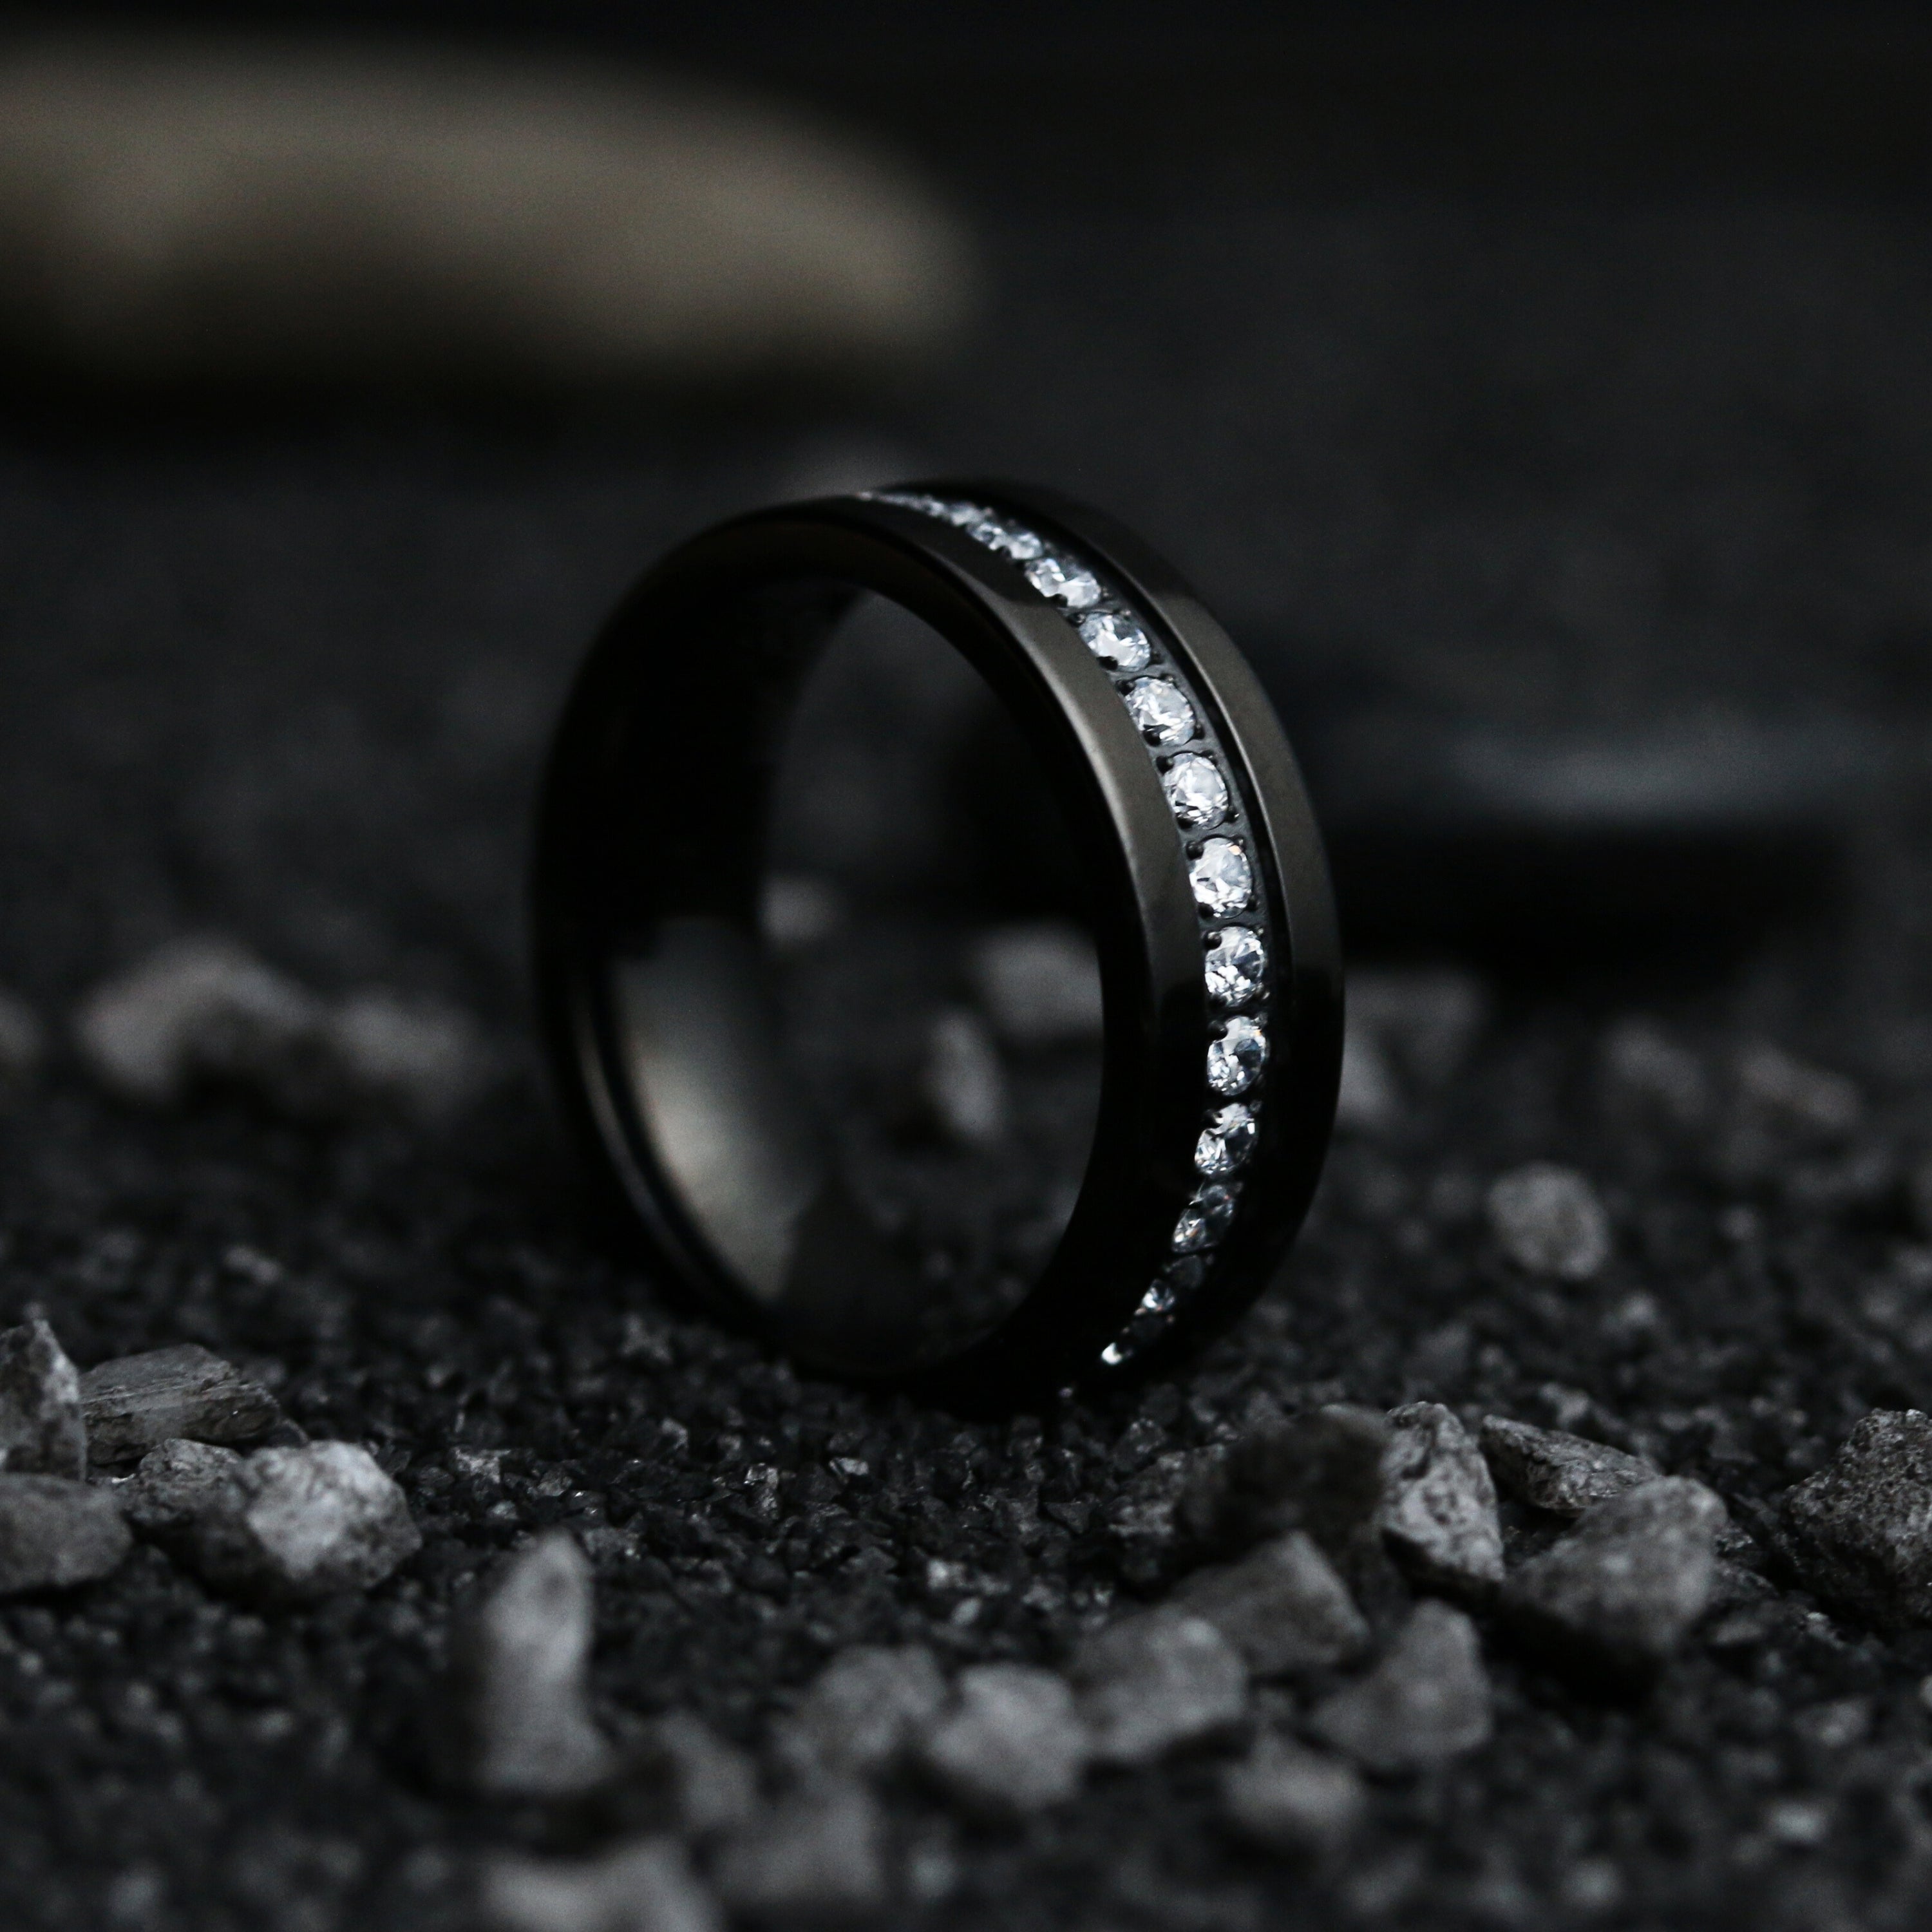 Matte-Finished Black Titanium Ring with Vertical Bar Pattern | 8mm